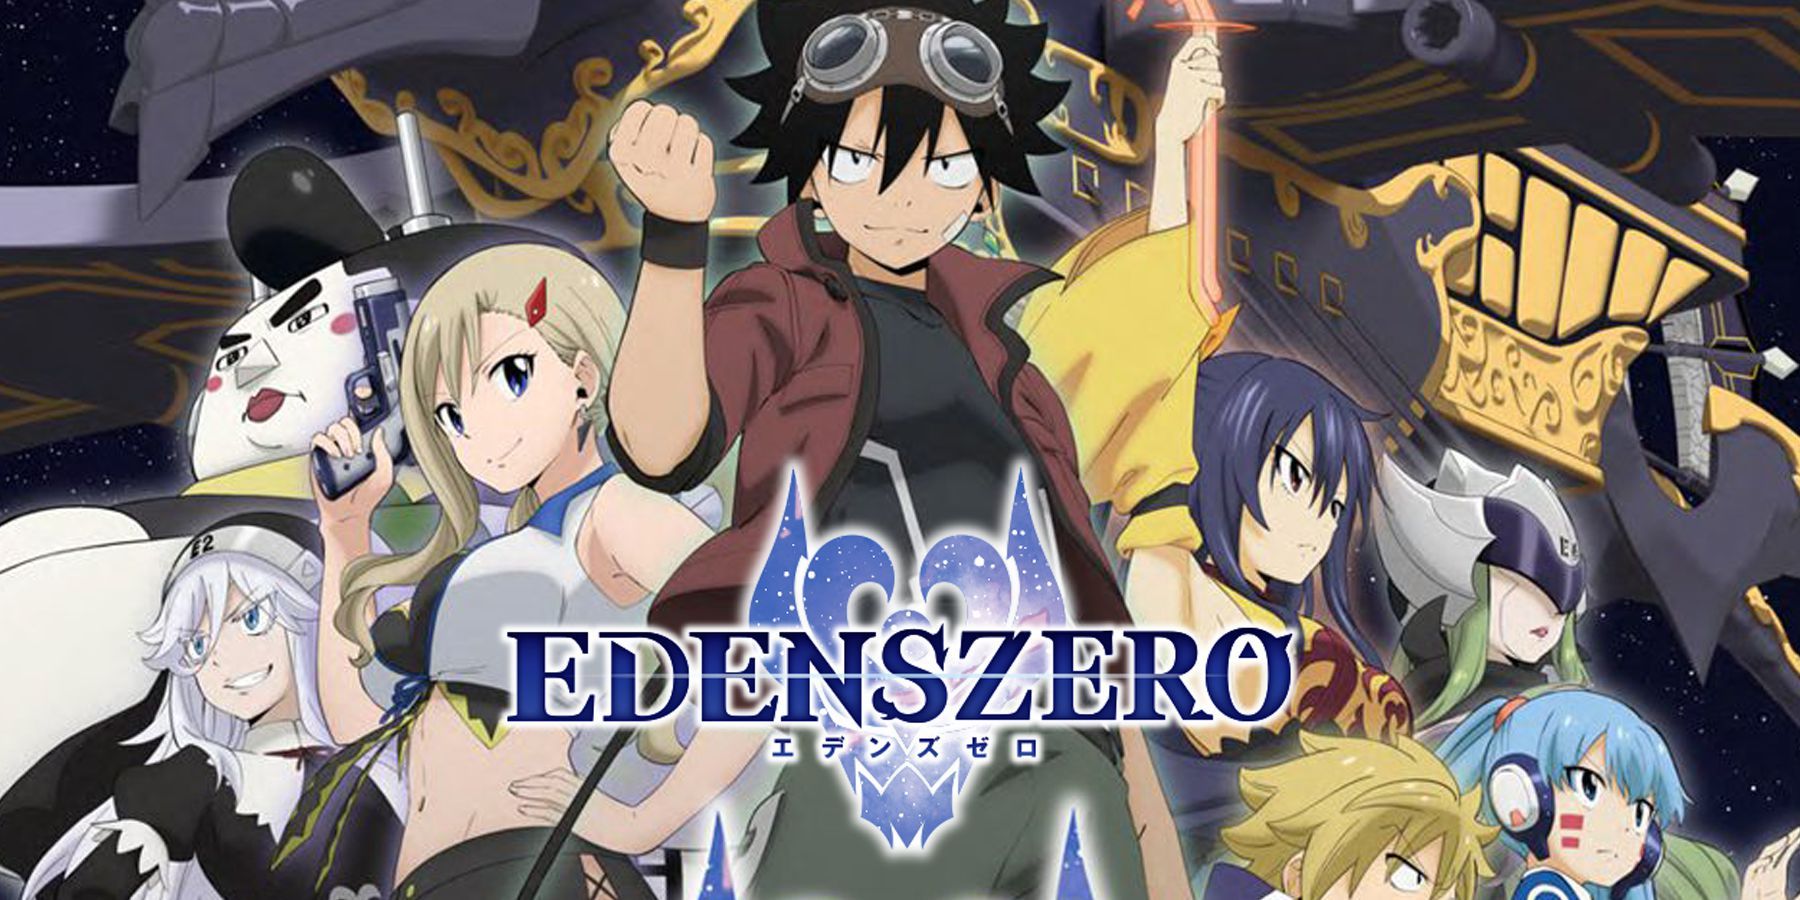 What To Expect From Season 2 of Edens Zero (According to the Manga)